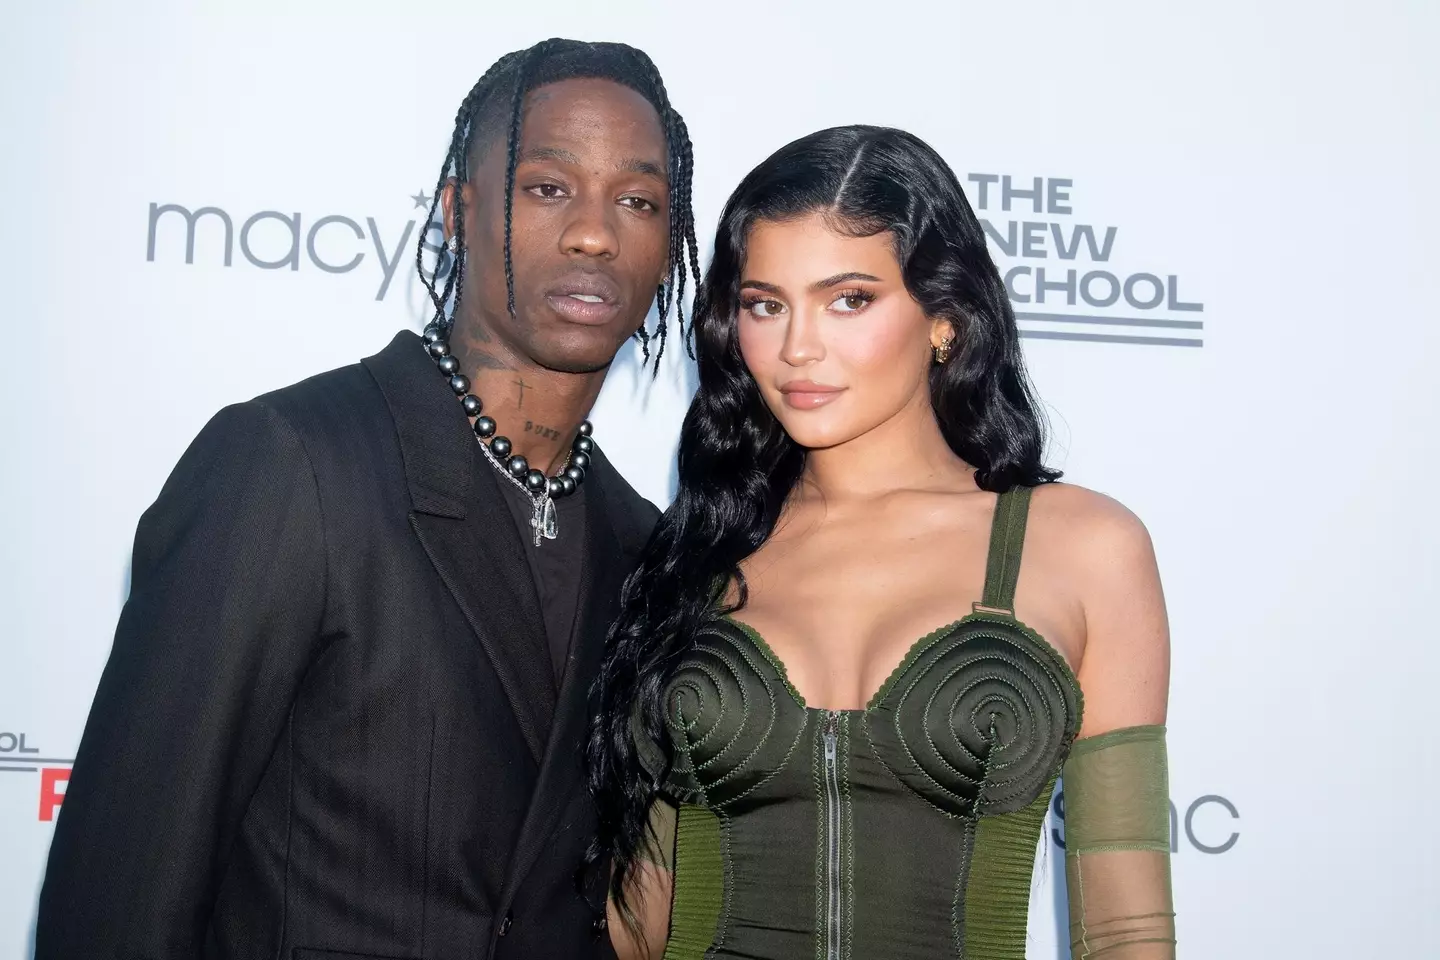 Kylie Jenner and Travis Scott welcomed their second child this month (